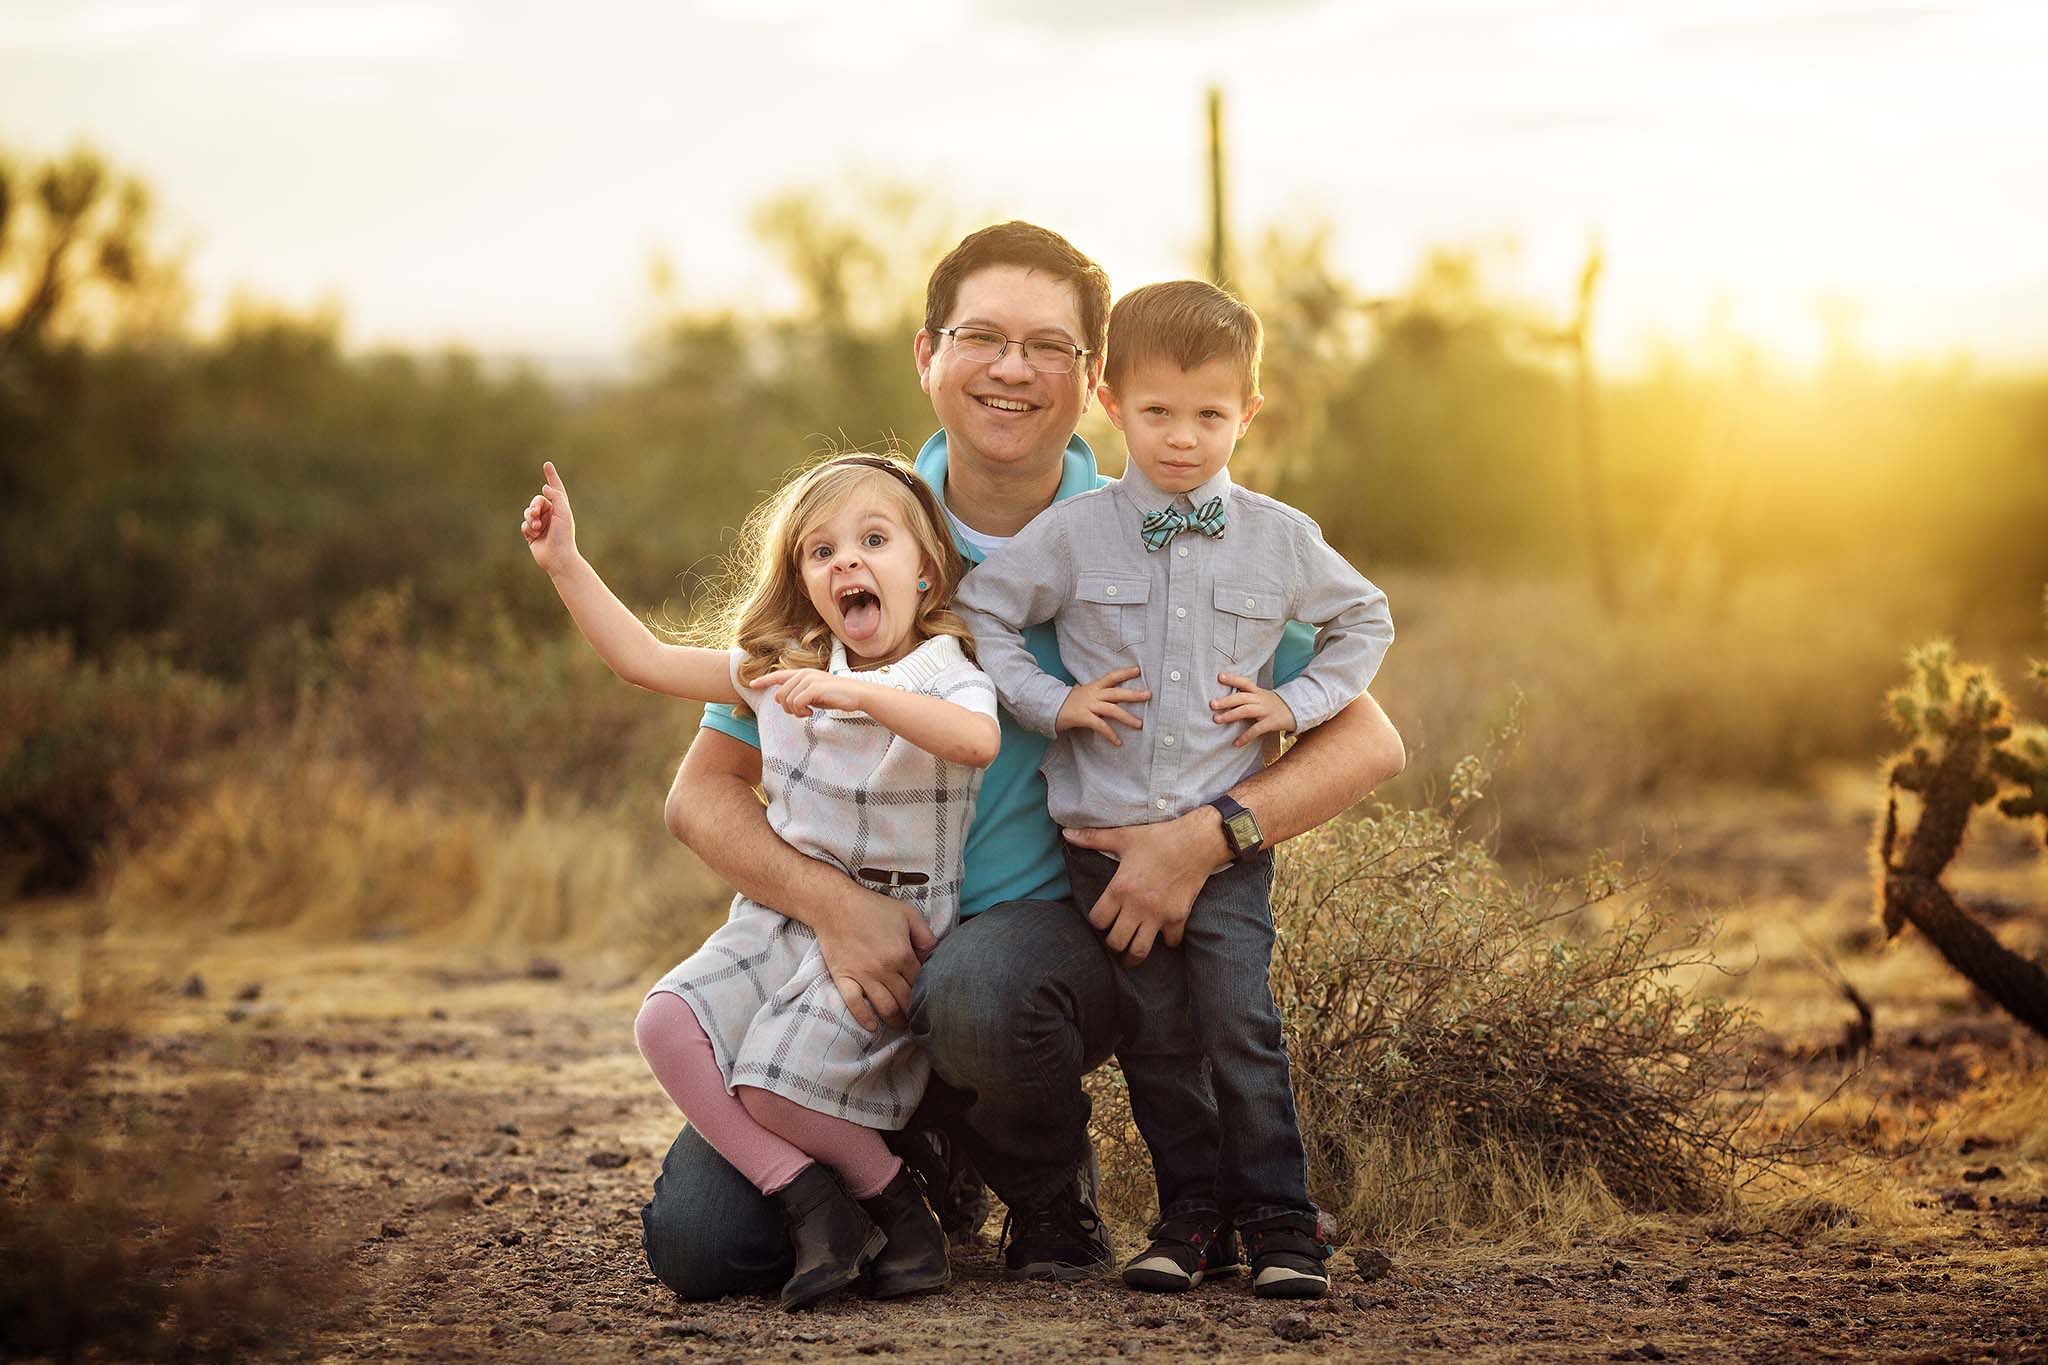 Fun family portrati with dad and kids at sunset near Phoenix, AZ